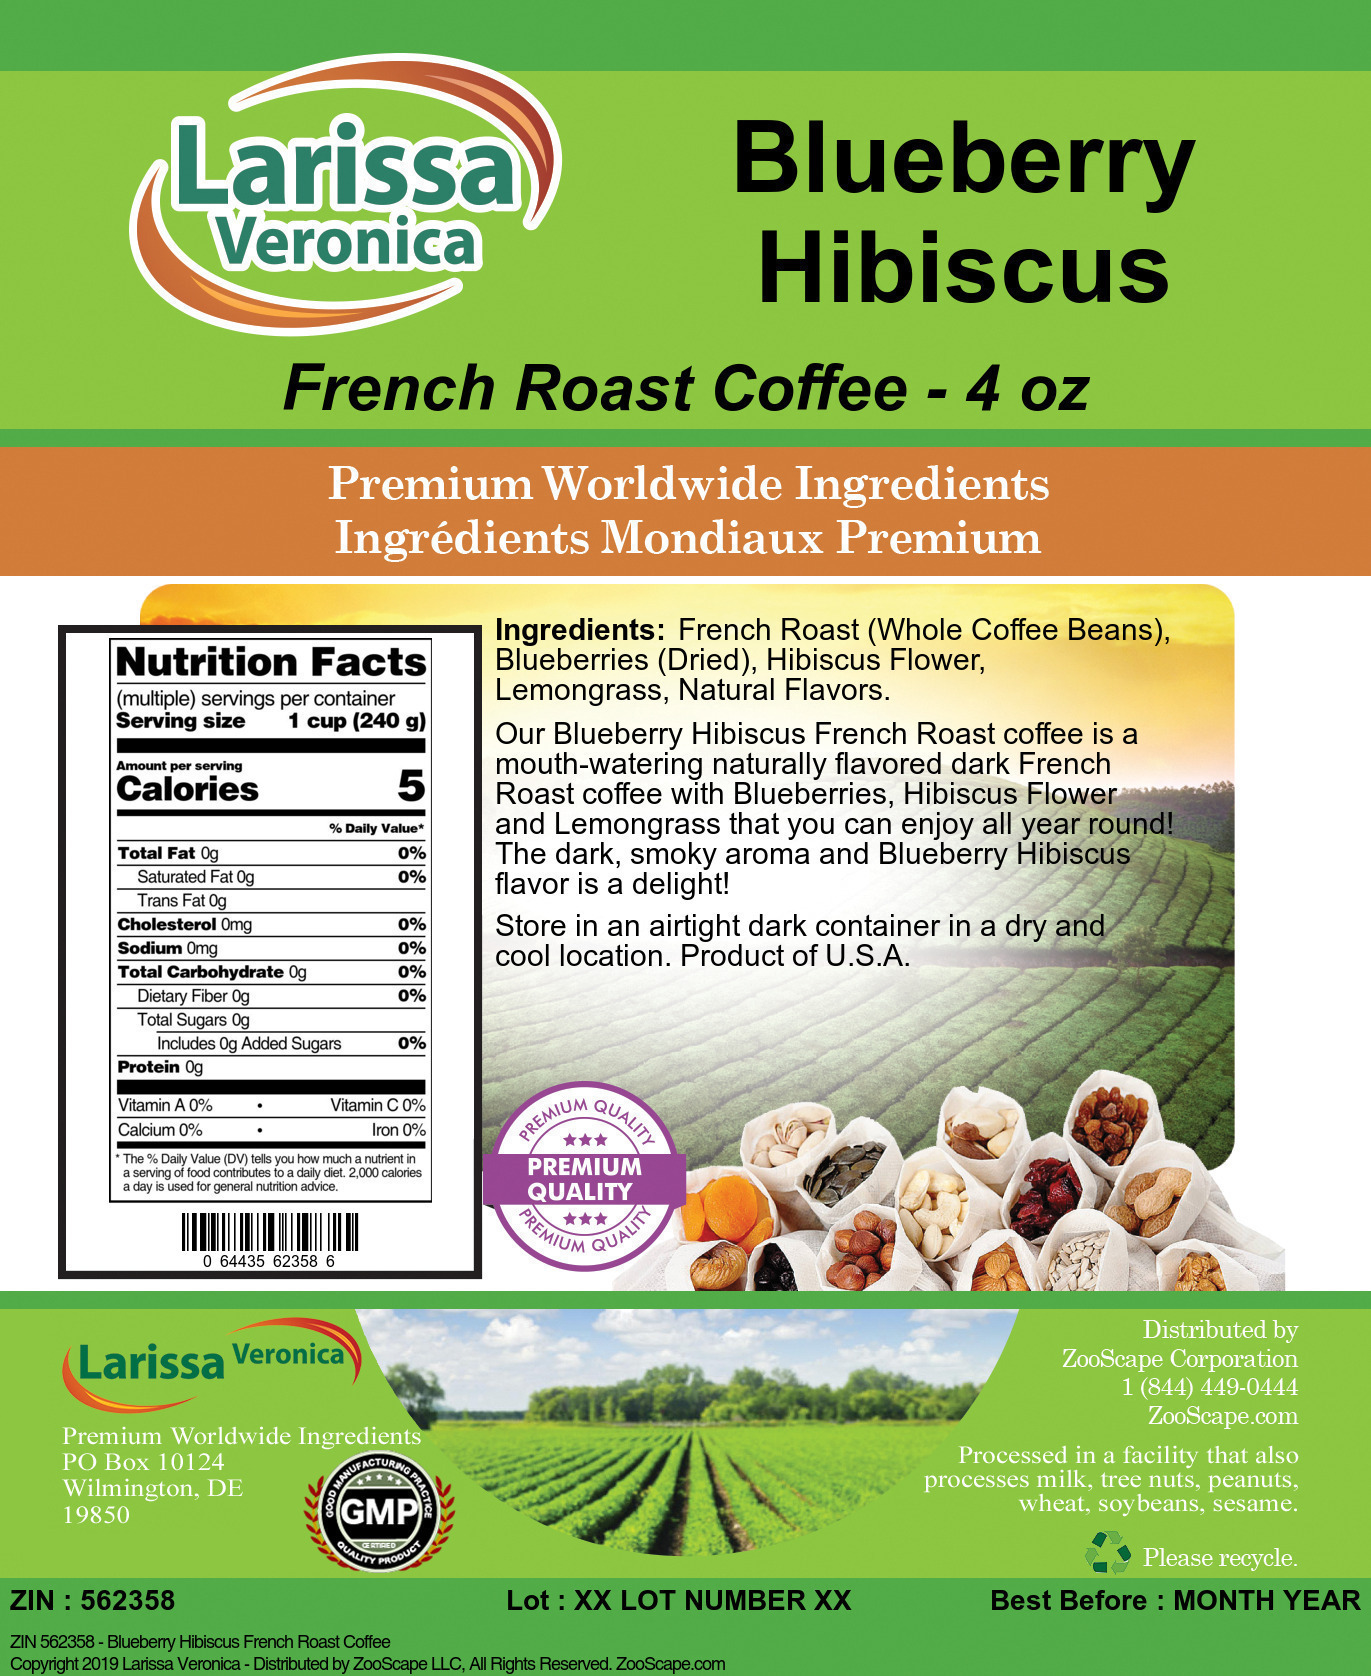 Blueberry Hibiscus French Roast Coffee - Label